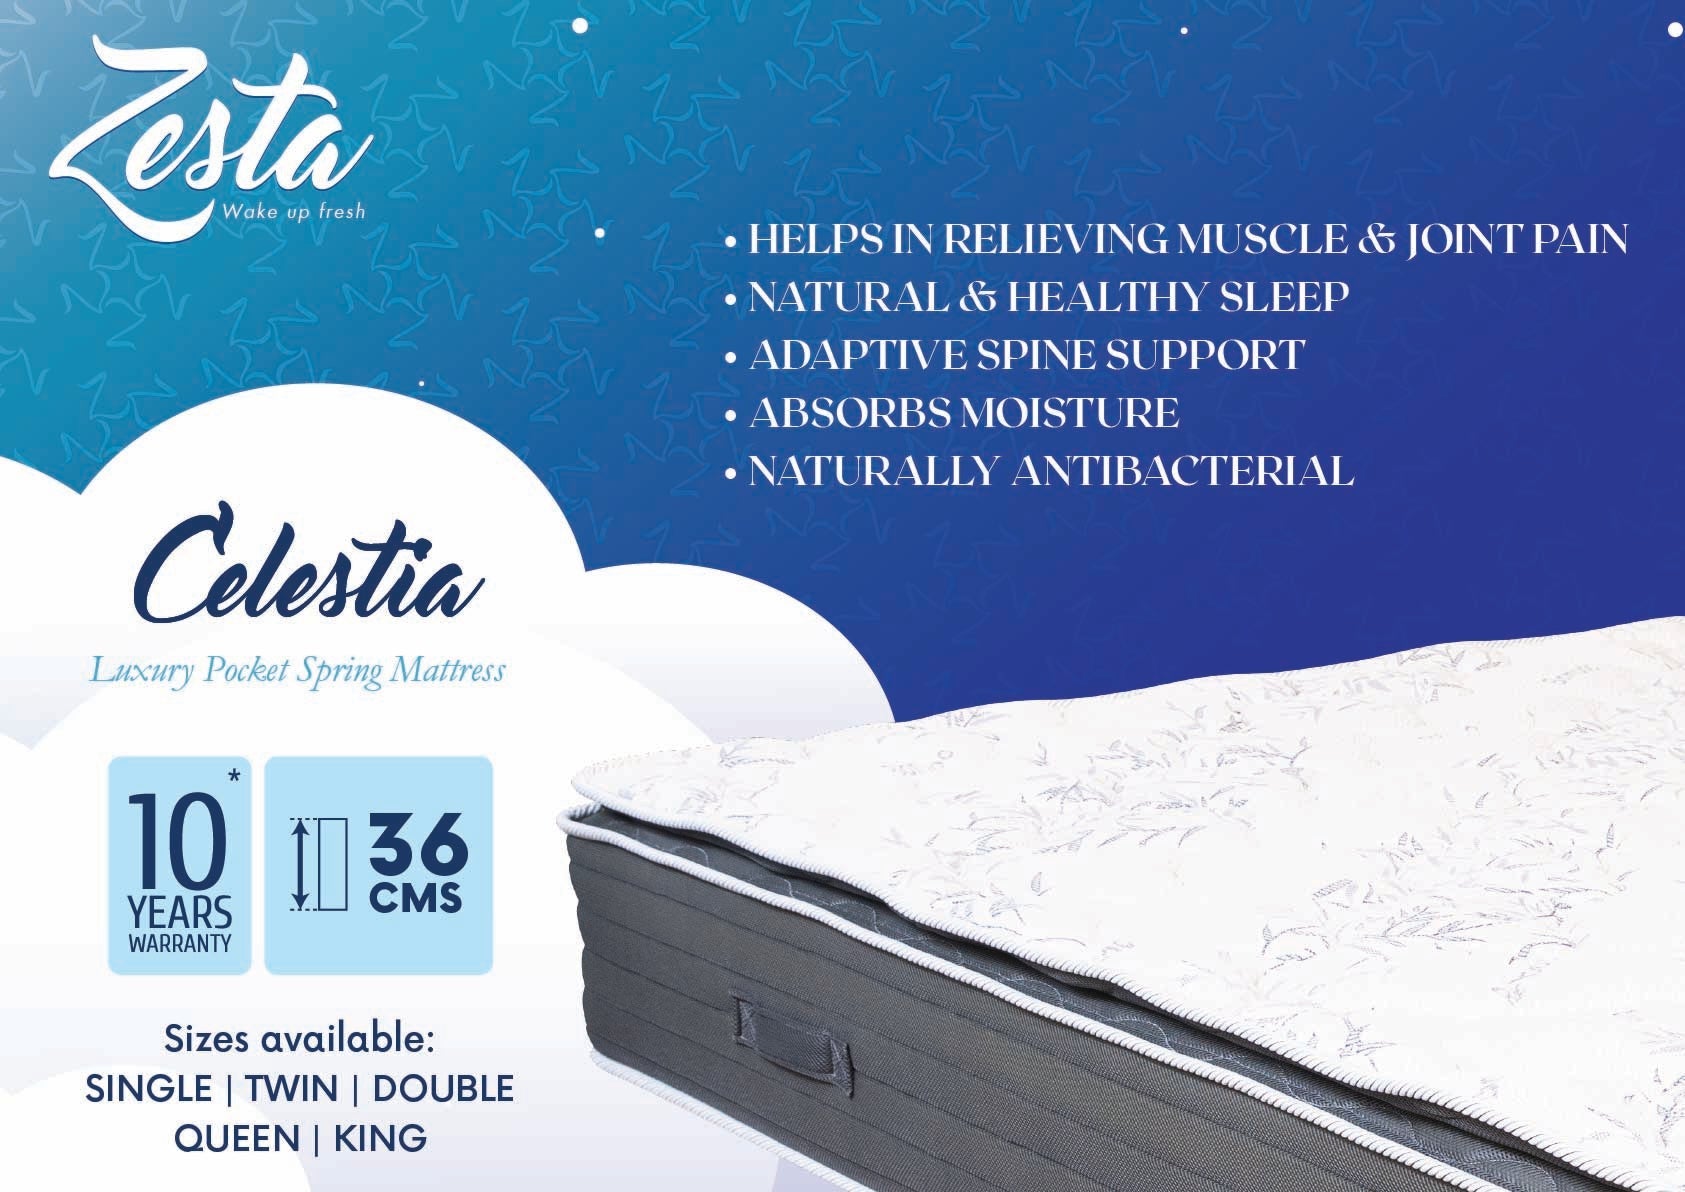 BUY Celestia Pocket Spring Mattress IN QATAR | HOME DELIVERY WITH COD ON ALL ORDERS ALL OVER QATAR FROM GETIT.QA